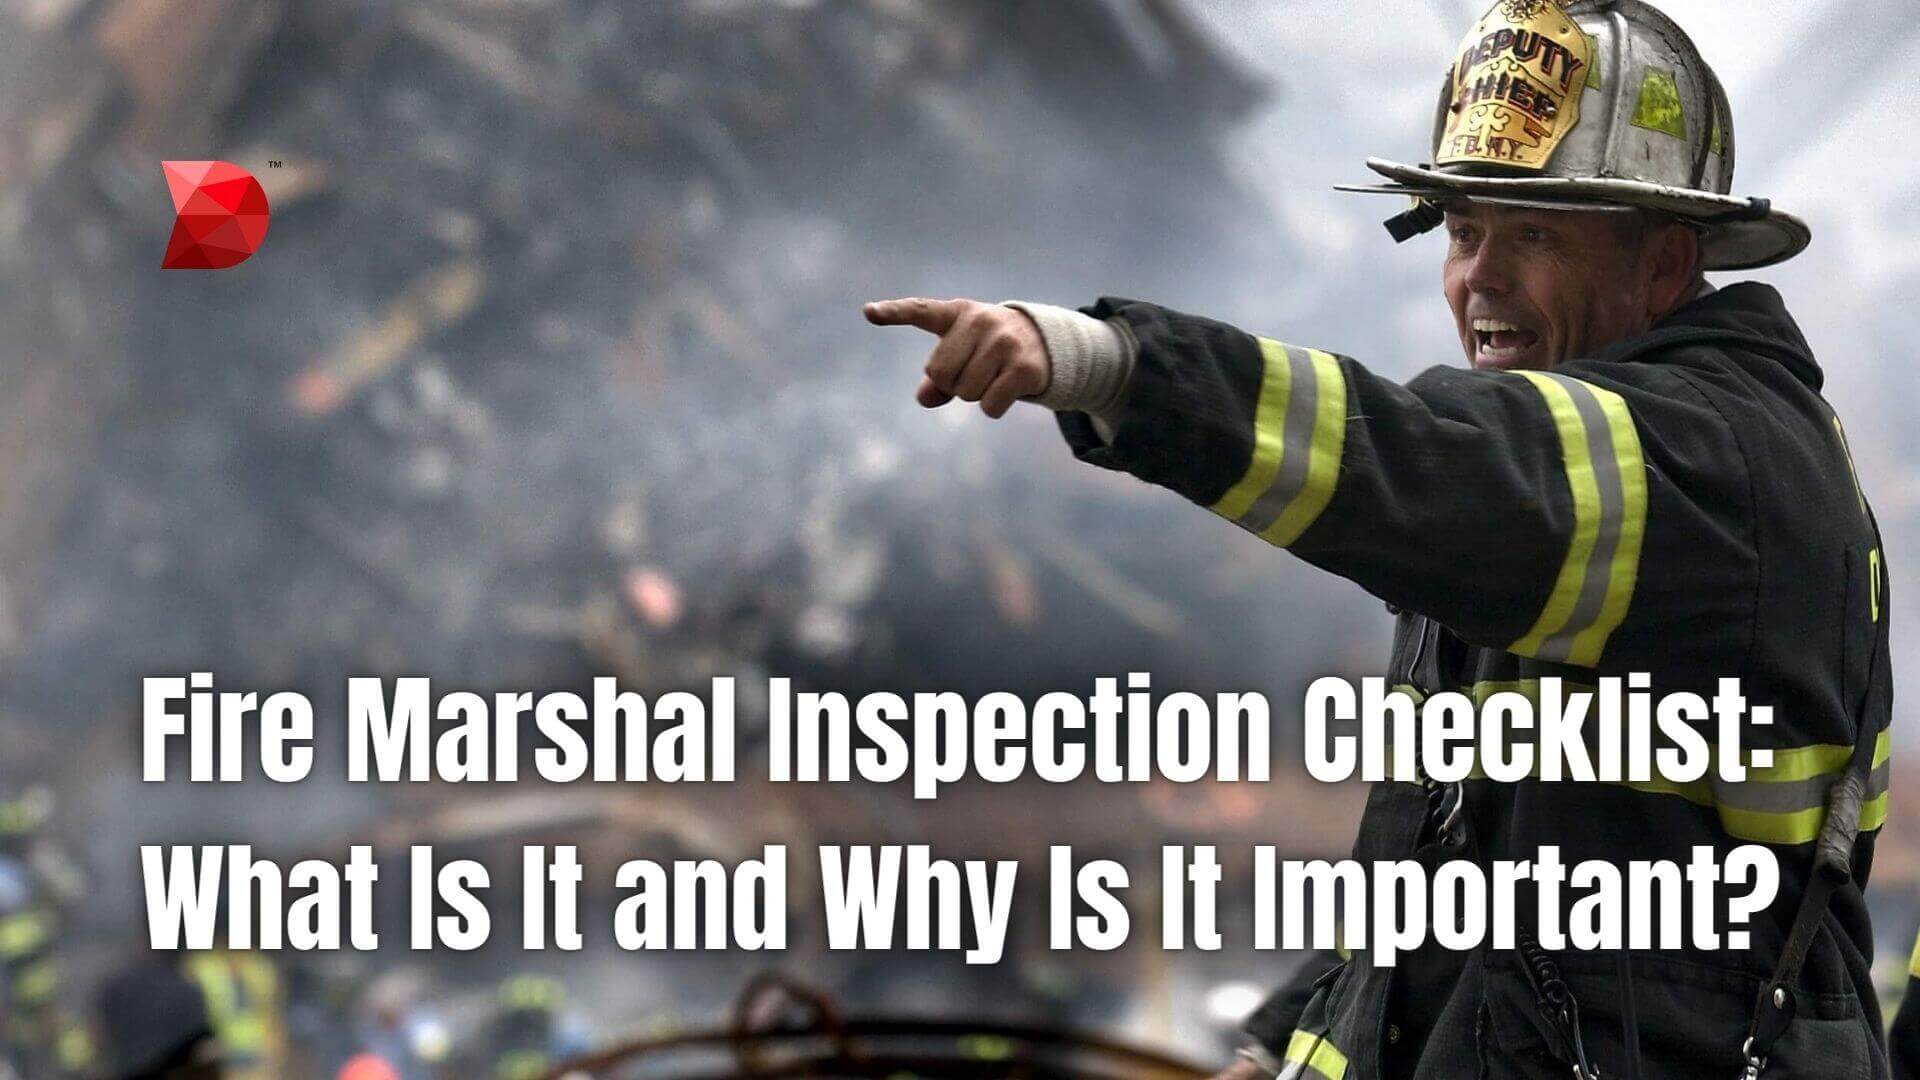 Fire Marshal Inspection Checklist What Is It and Why Is It Important